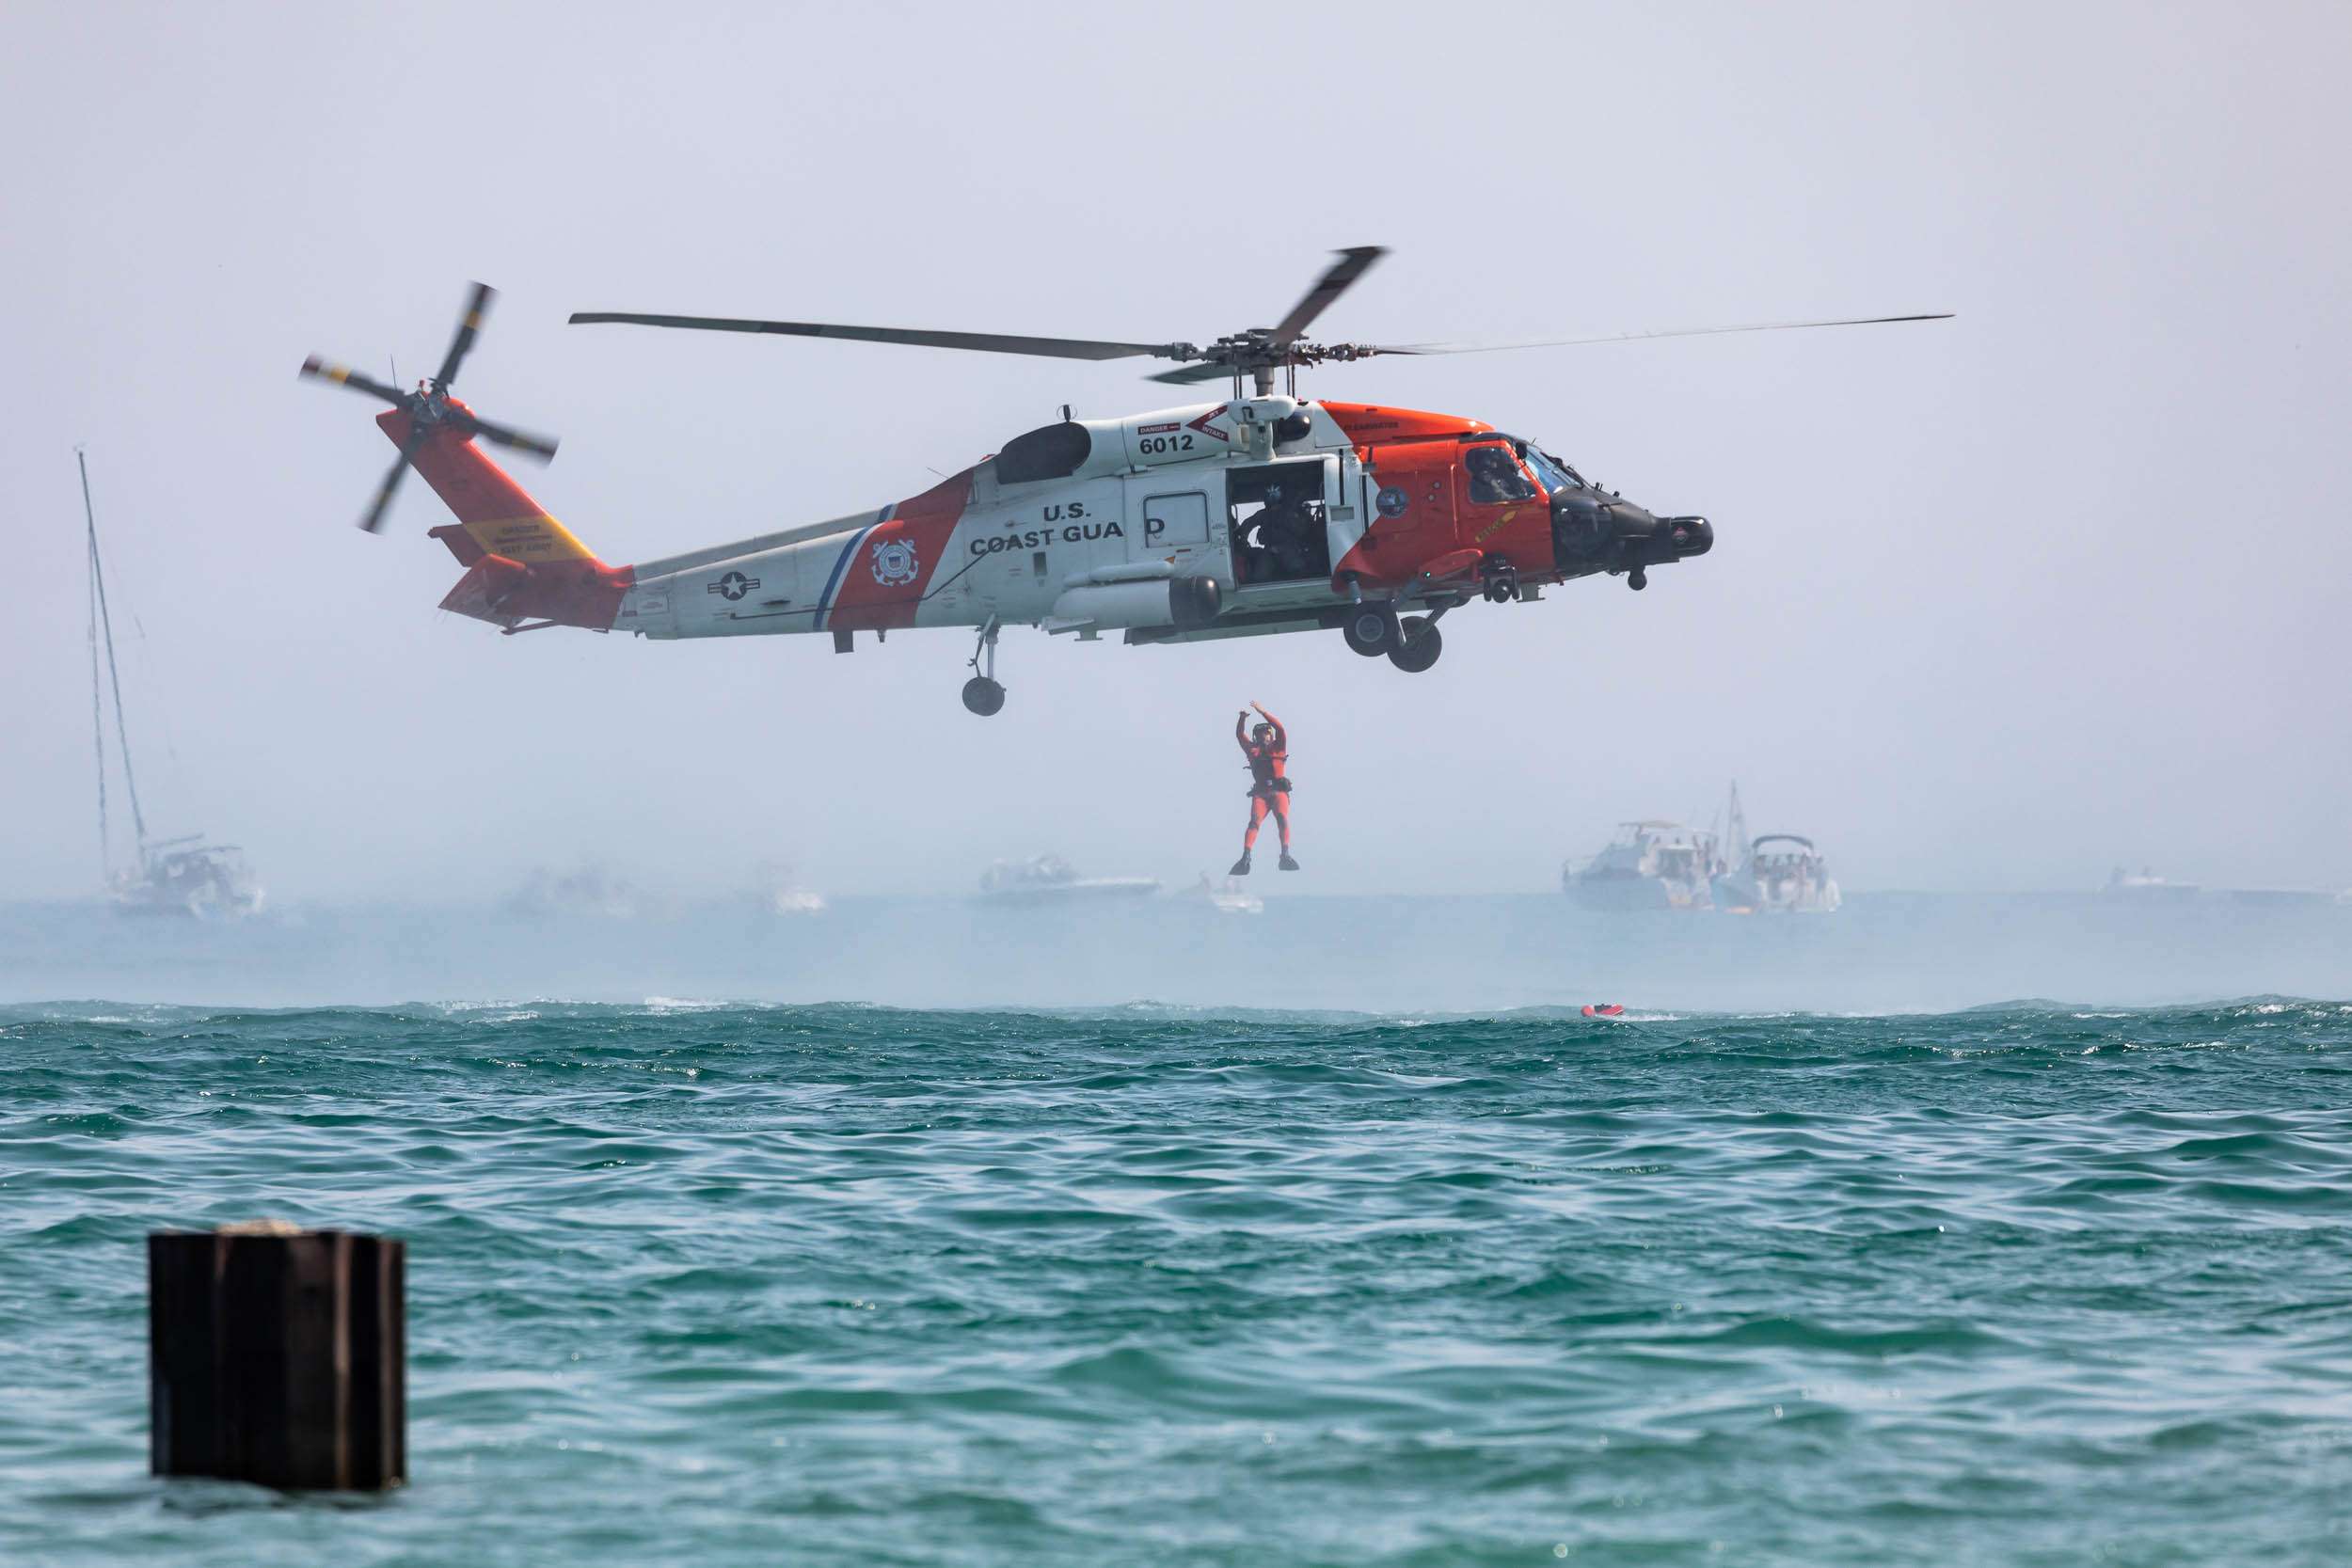 A rescue diver jumps from a US Coast Guard helicopter